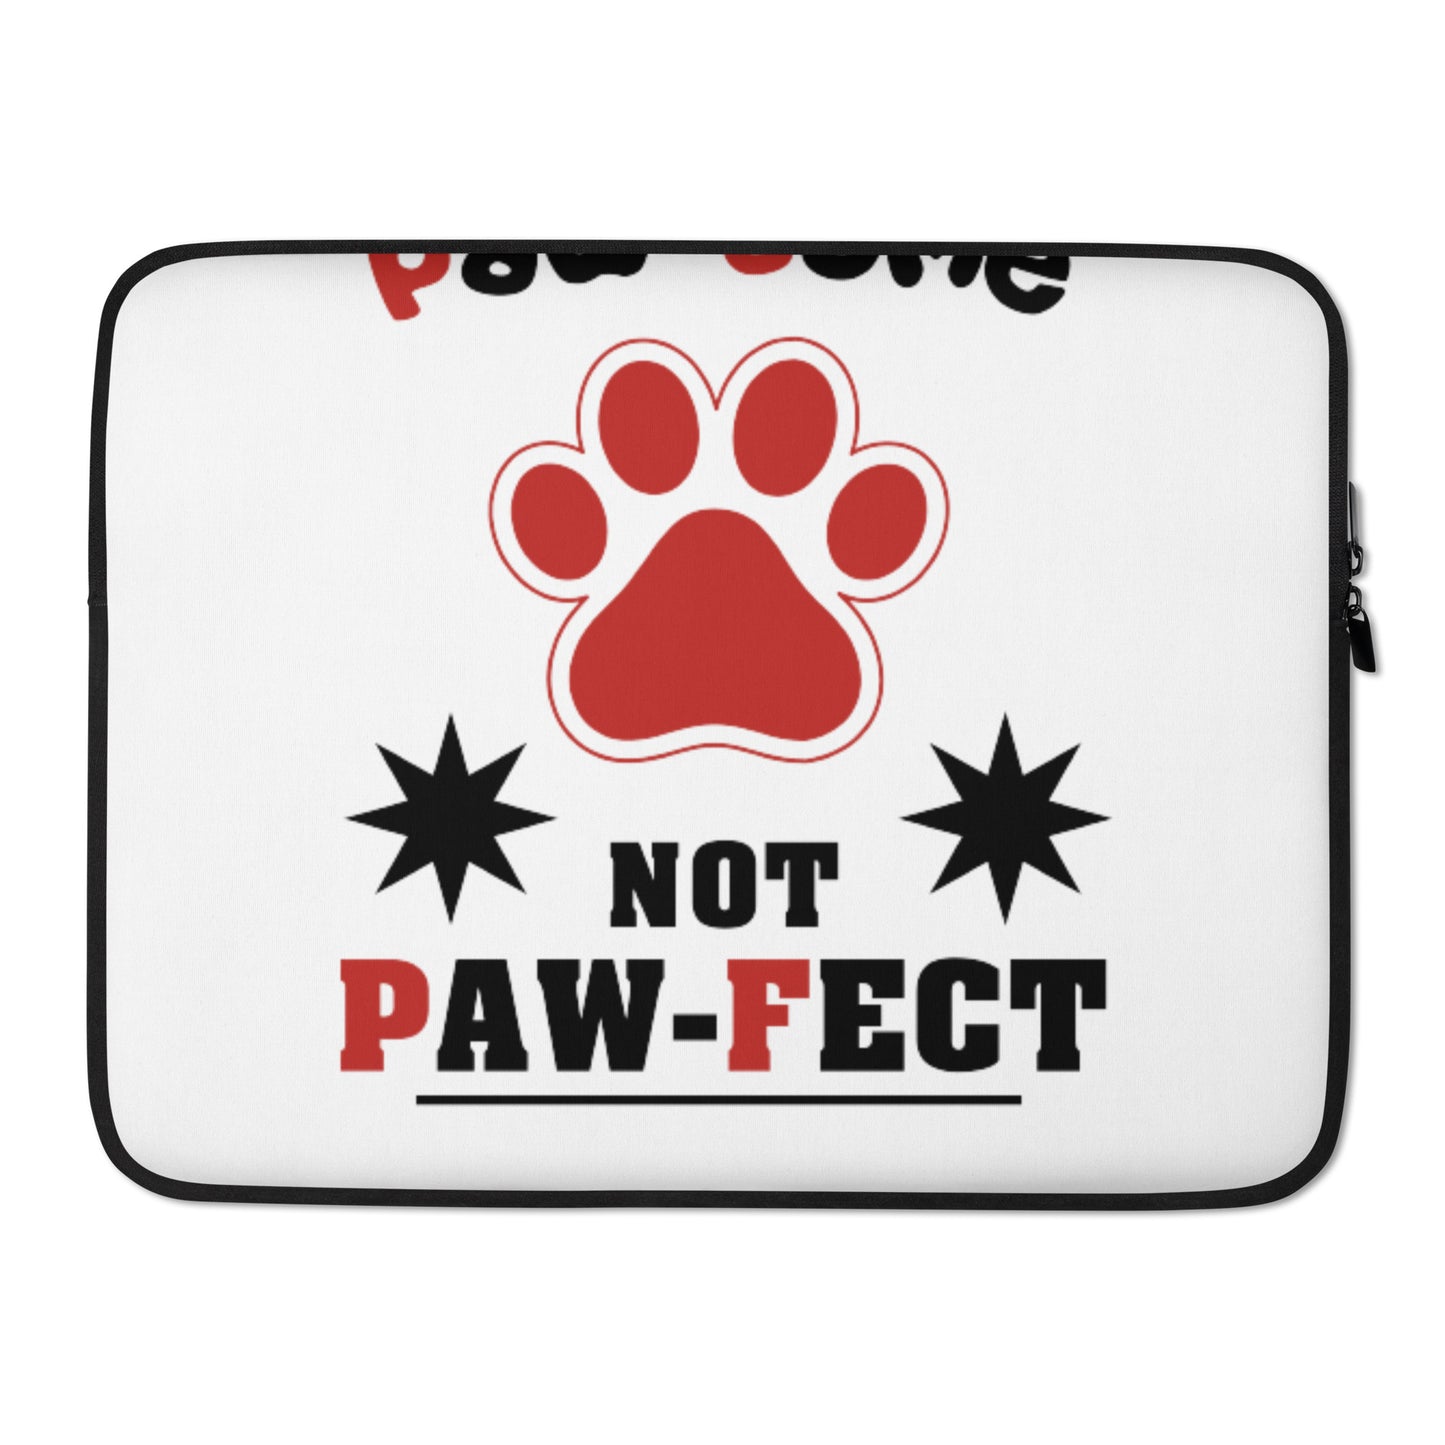 Pawsitively adorable (Laptop Sleeve)